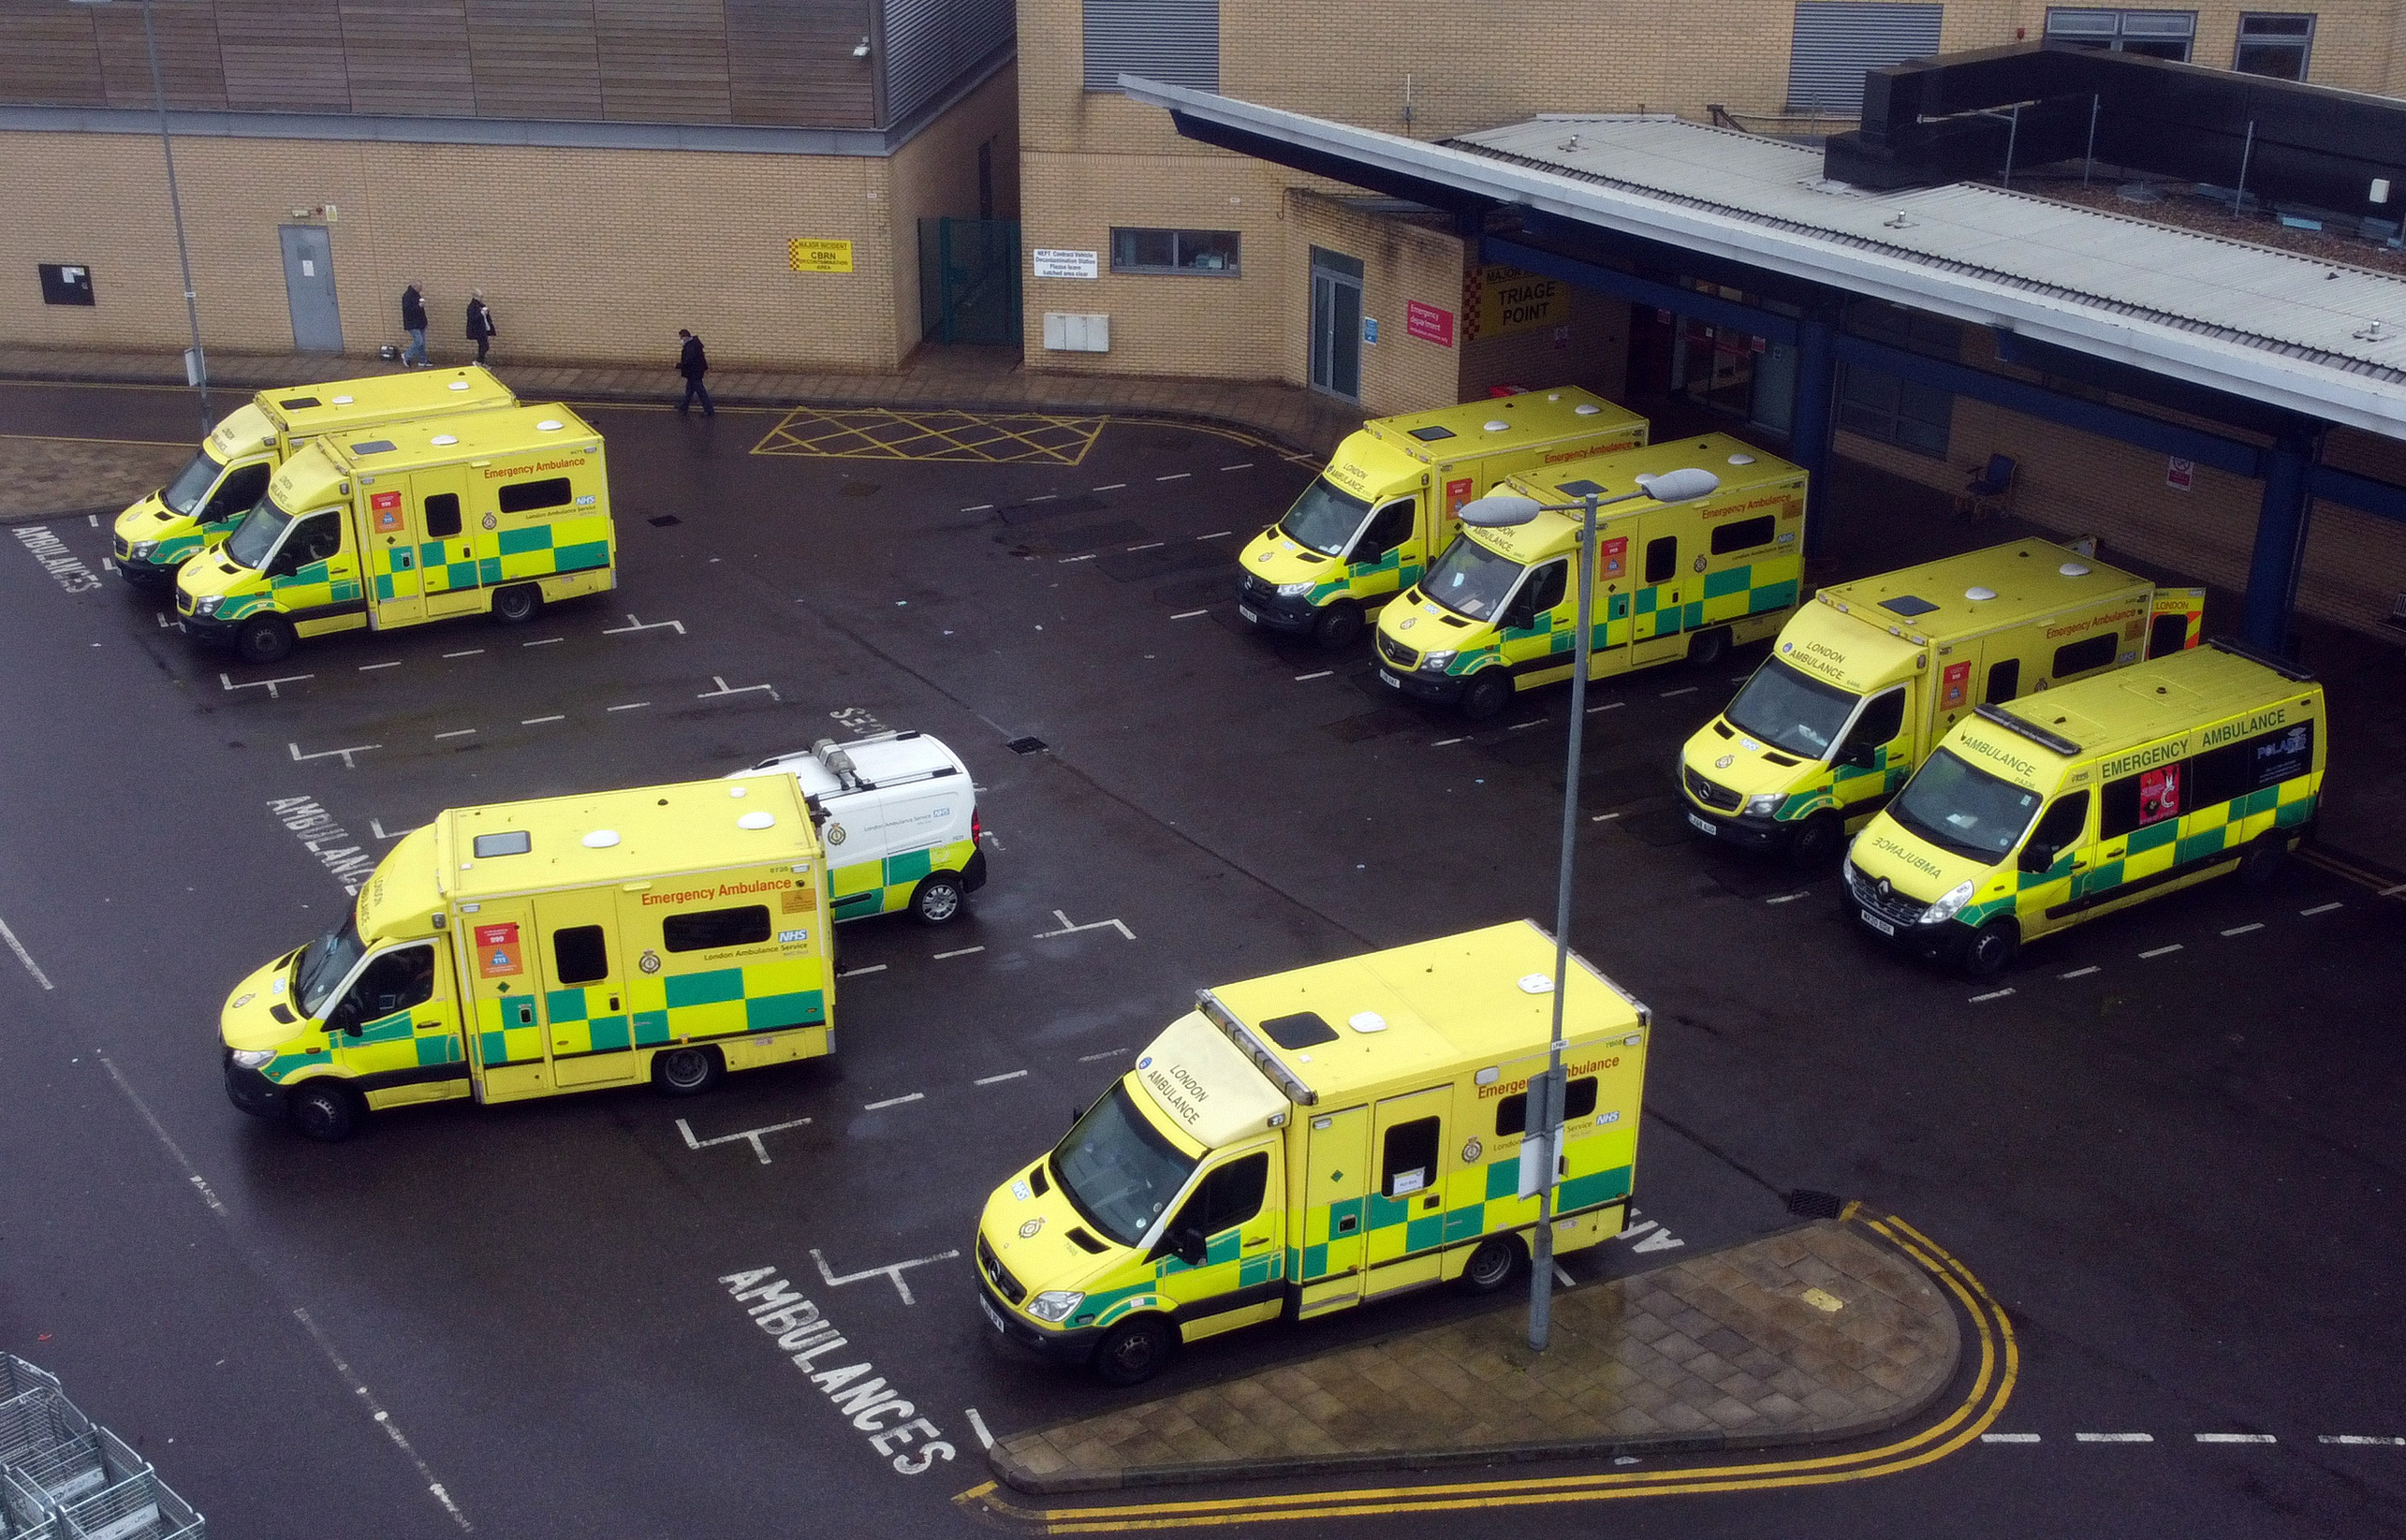 Ambulances parked at Queen's Hopital in London